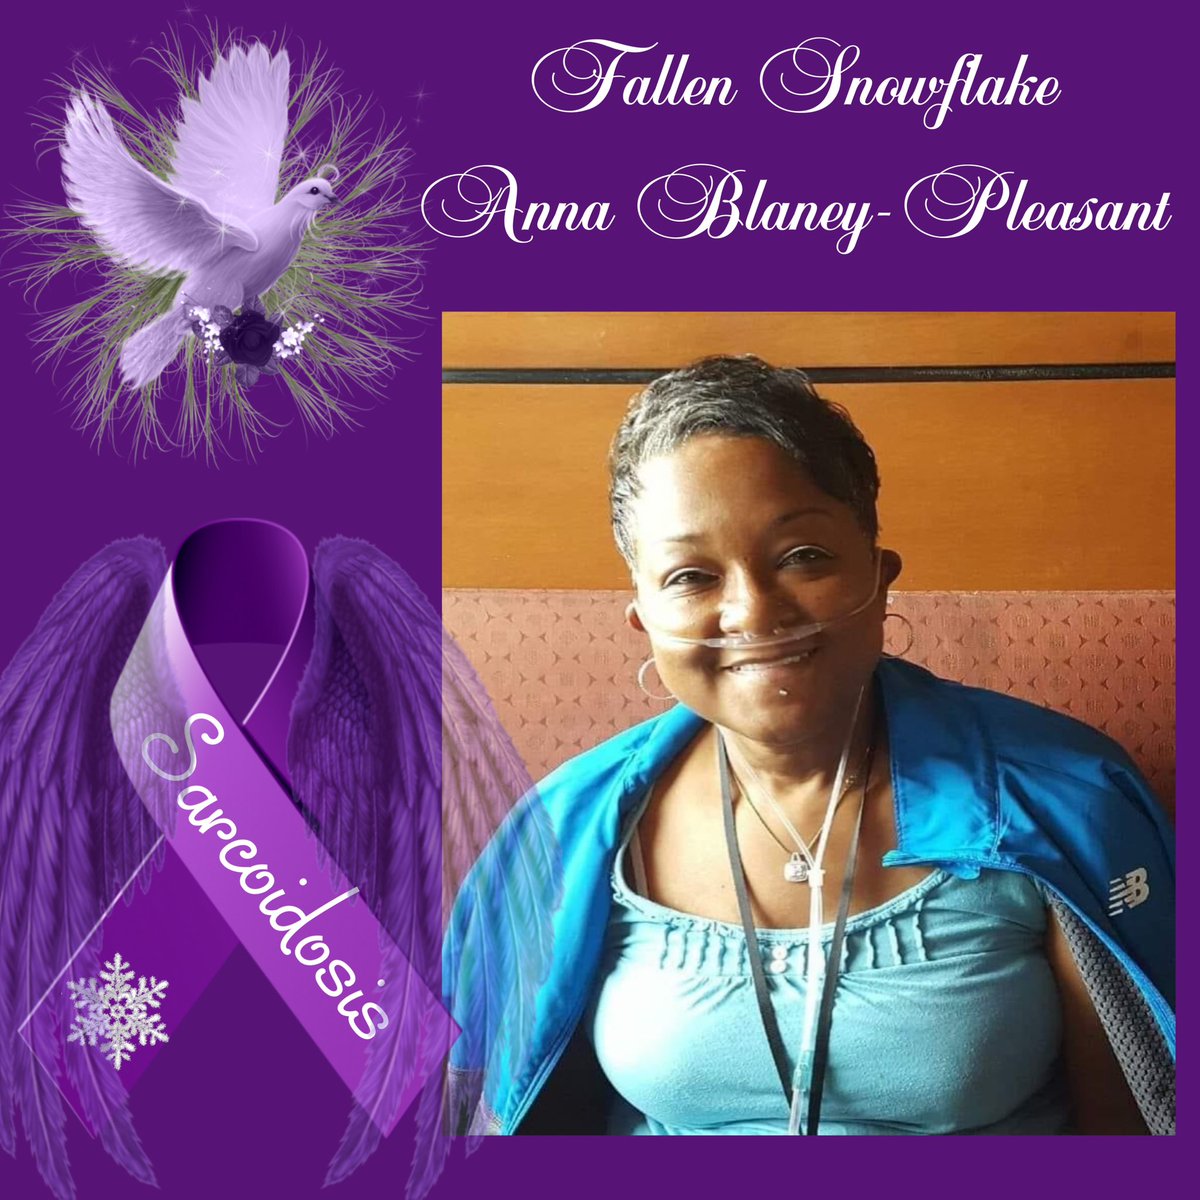 Rest in Heavenly Peace Anna Blaney-Pleasant. Your words of wisdom, your encouragement and your warmth will be missed. We’re sending our heartfelt condolences and prayers to Anna’s family, Sarcoidosis community and all that had the pleasure of knowing her.💜🙏🏽💜 #Sarcoidosis